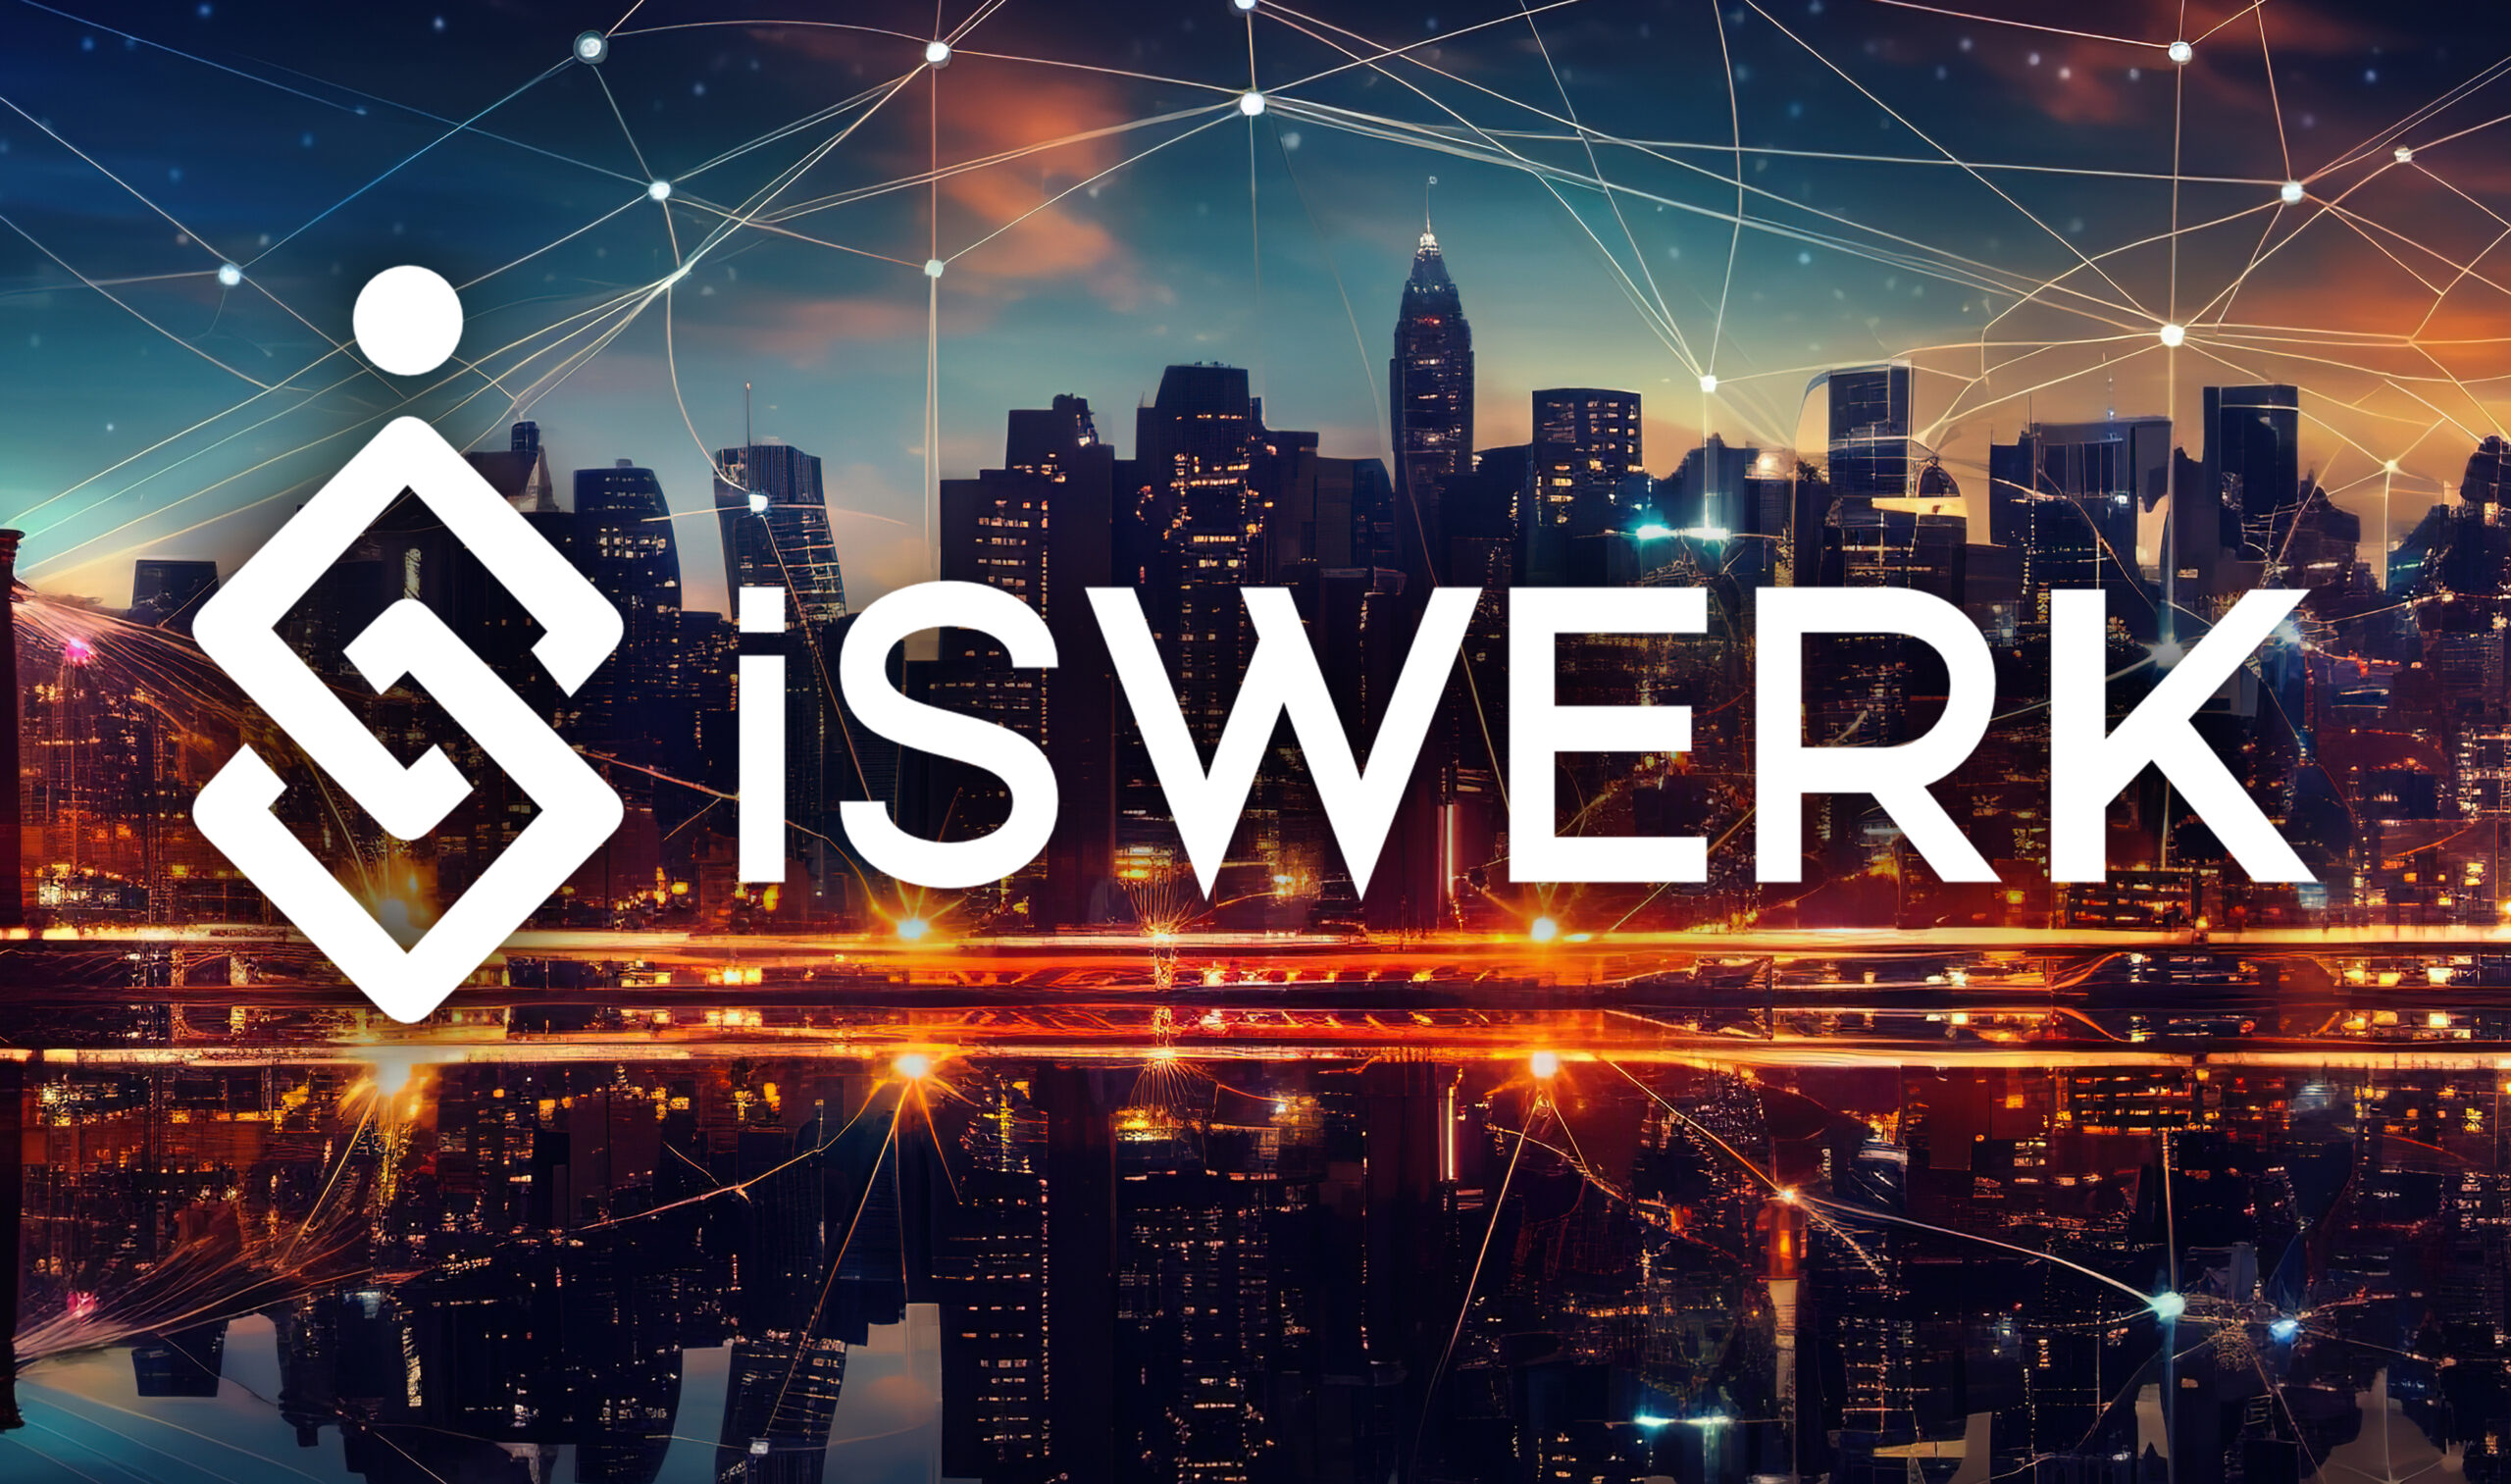 Remote Work -  iSWerk logo providing a barrier for the improved business, amid the massive technological buildings.